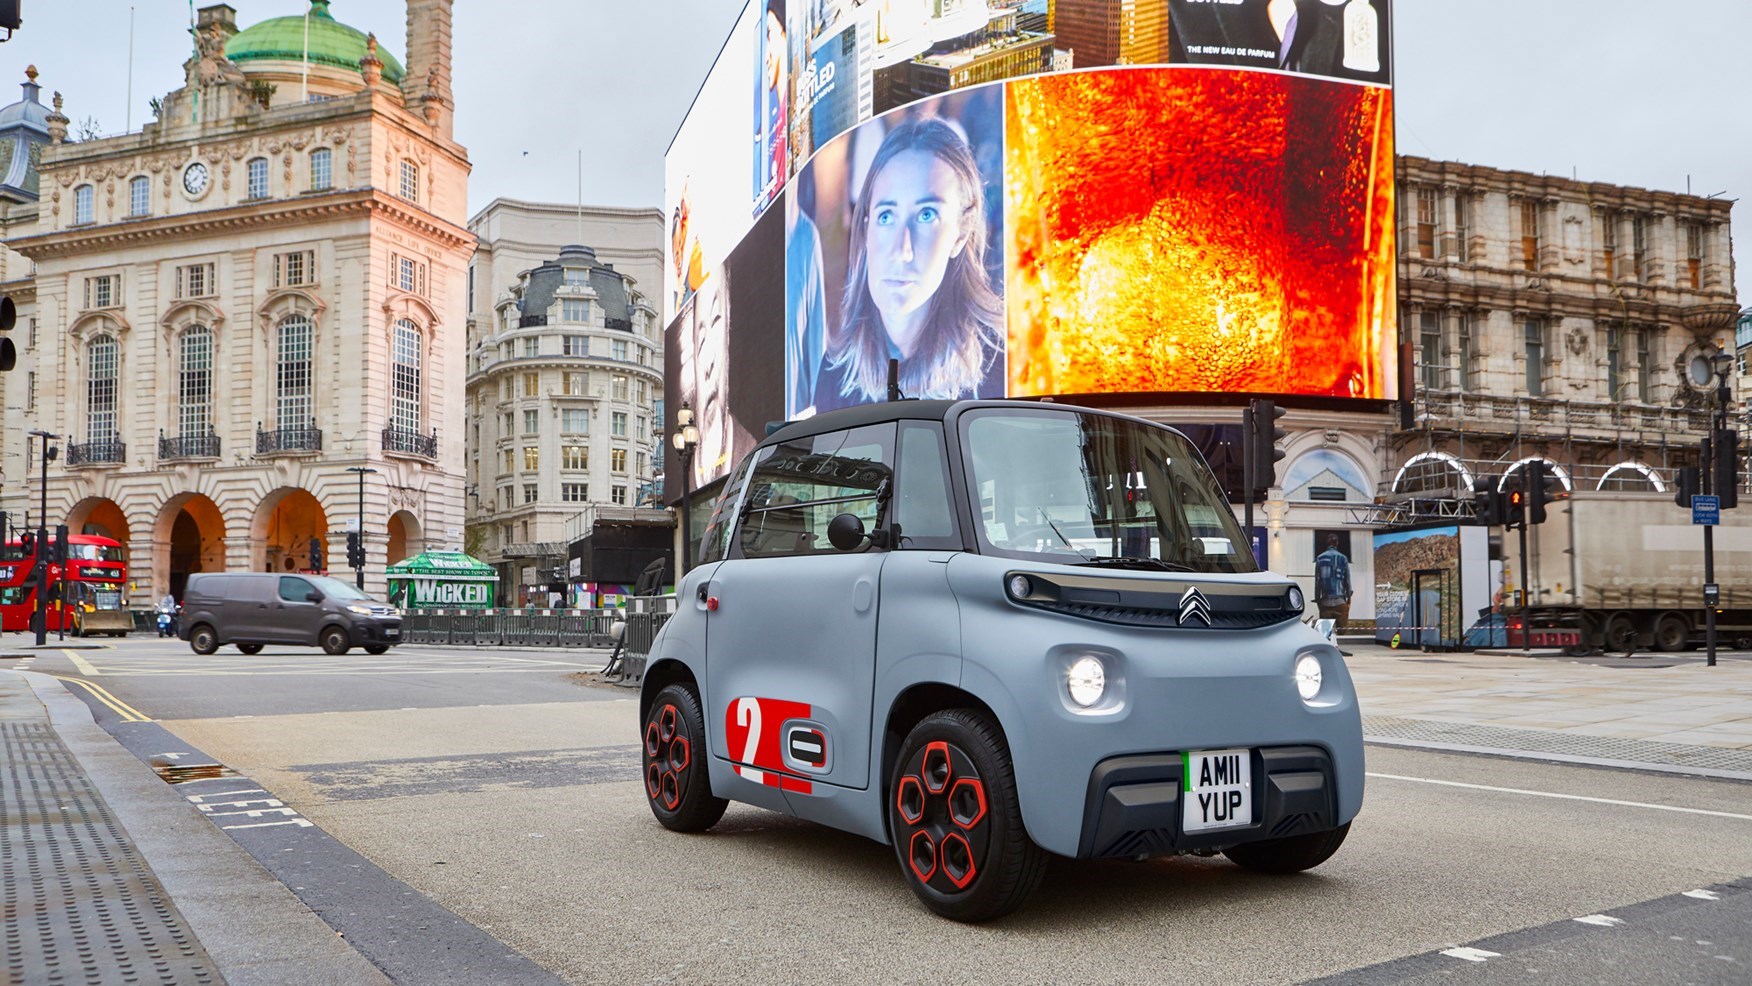 Tiny electric Smart car will also have smallest price